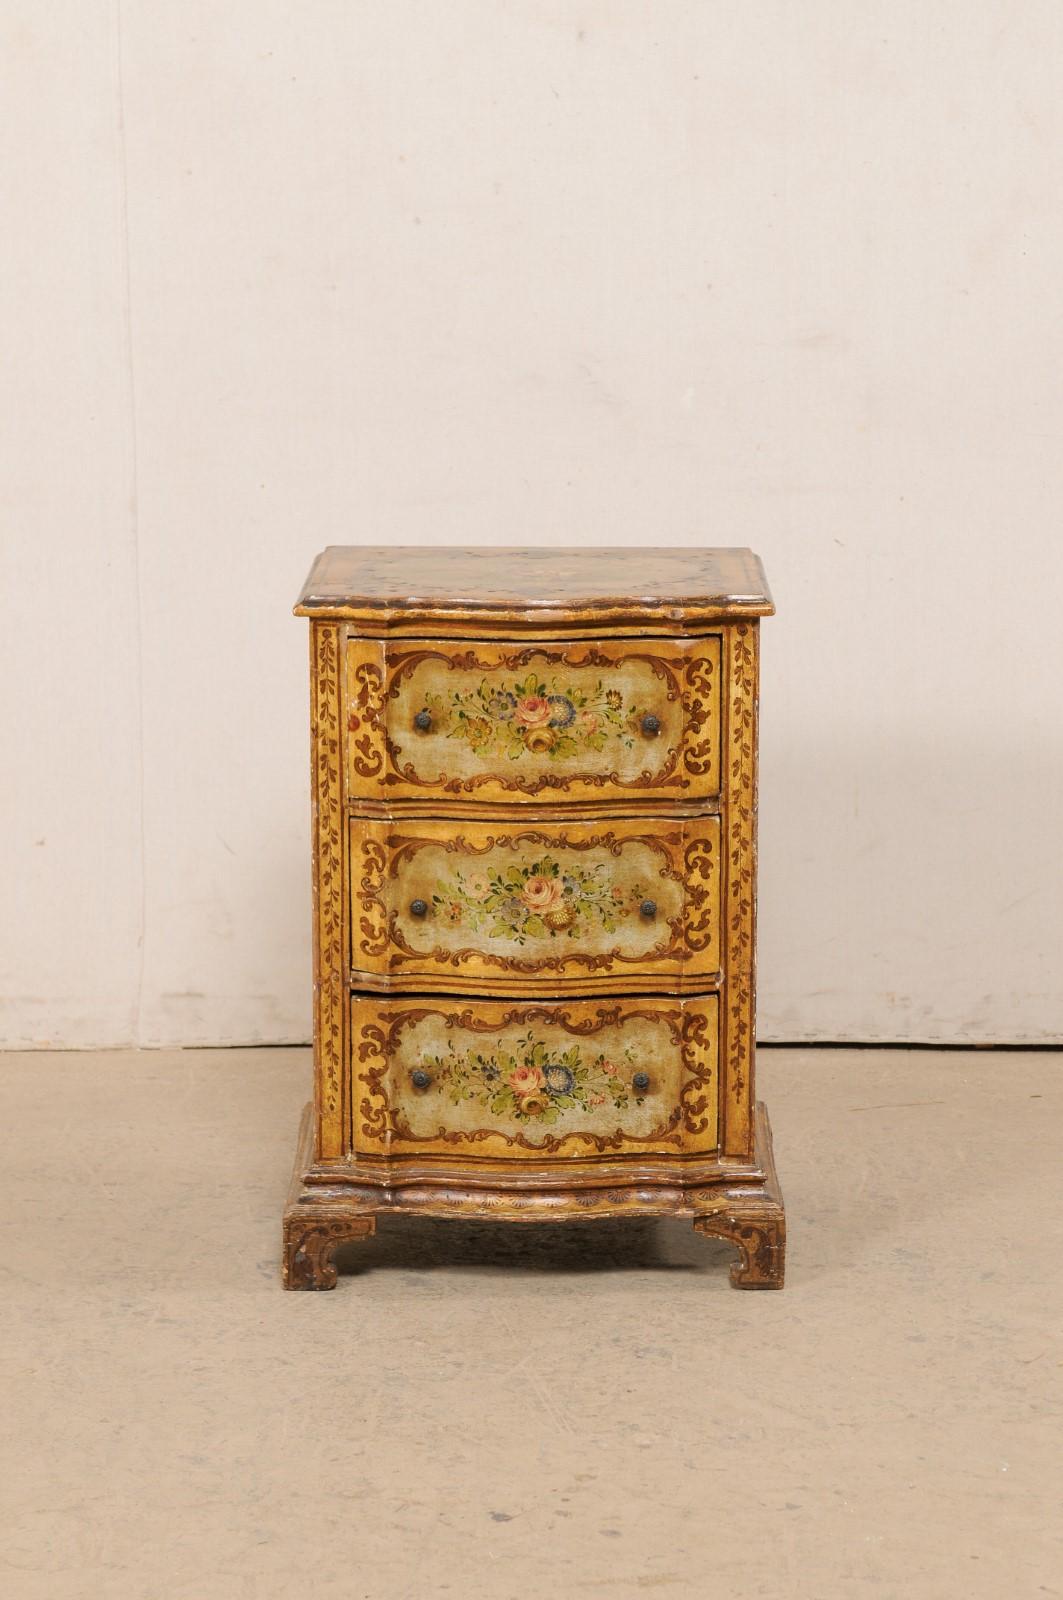 An Italian smaller-sized serpentine chest of drawers, with hand-painted floral embellishments, from the 19th century. This antique commode from Italy has a shapely serpentine facade, houses three drawers, and is presented on carved bracket feet. The